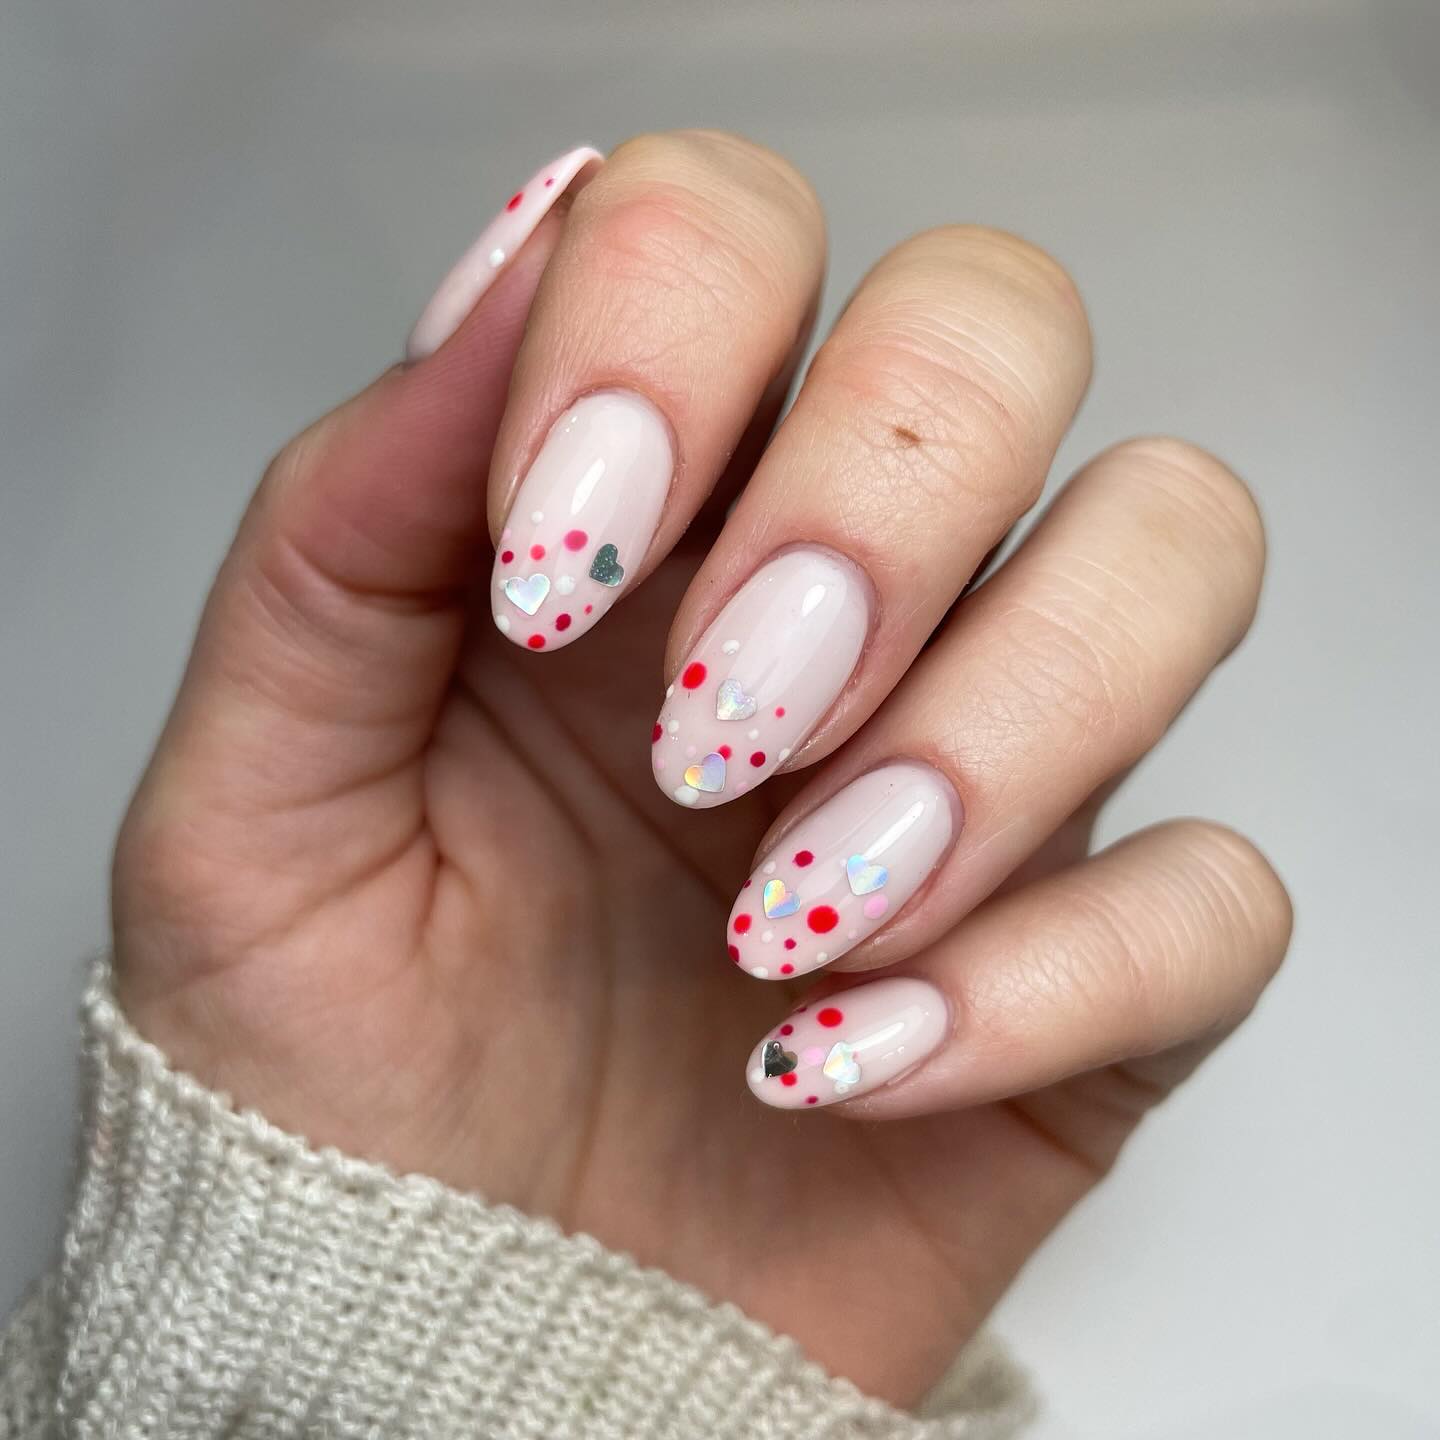 100 Pretty Spring Nail Designs To Try This Year images 62